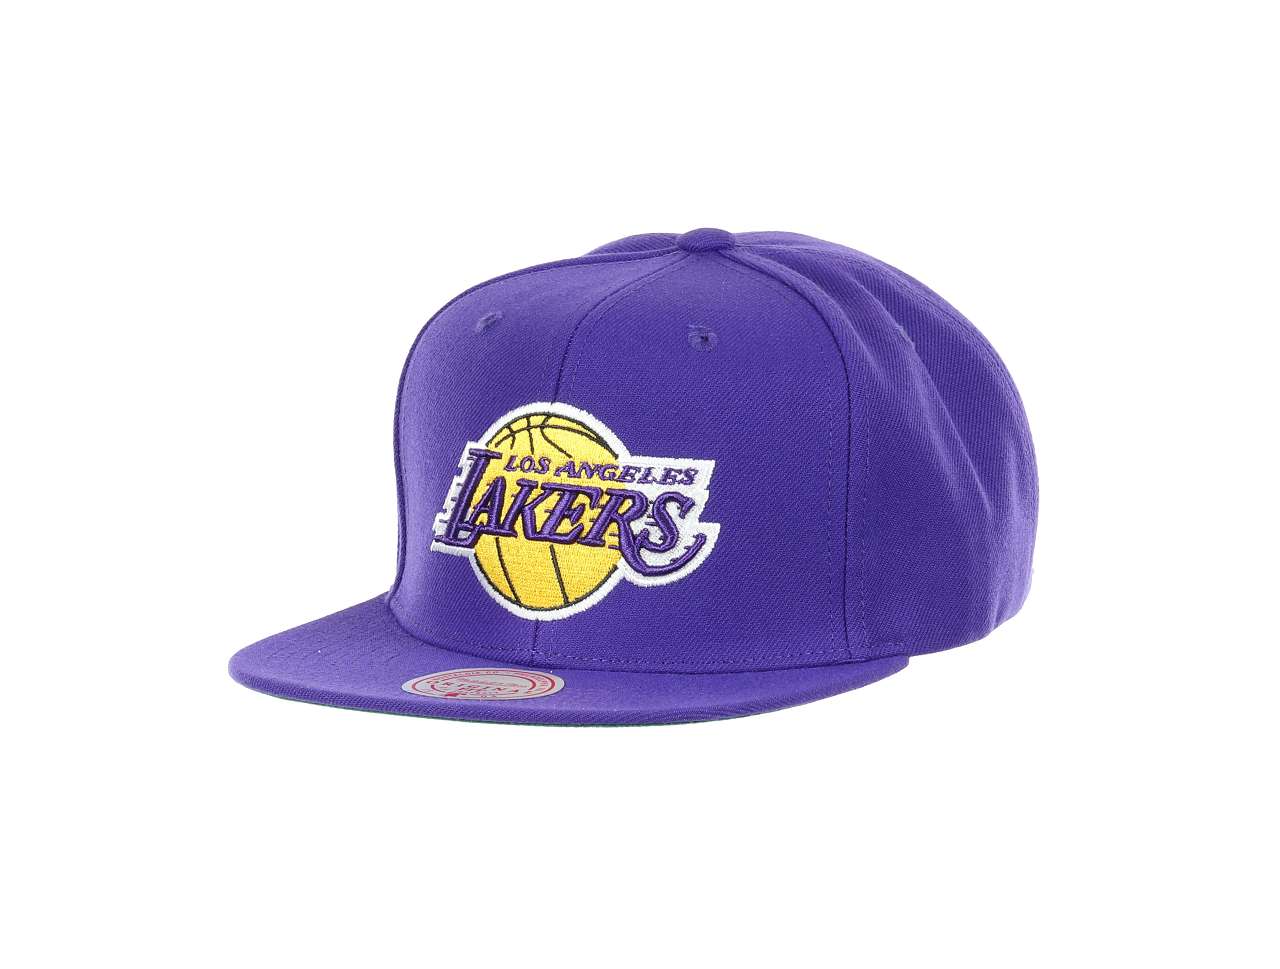 Los Angeles Lakers NBA Conference Patch Purple Original Fit Snapback Cap Mitchell & Ness